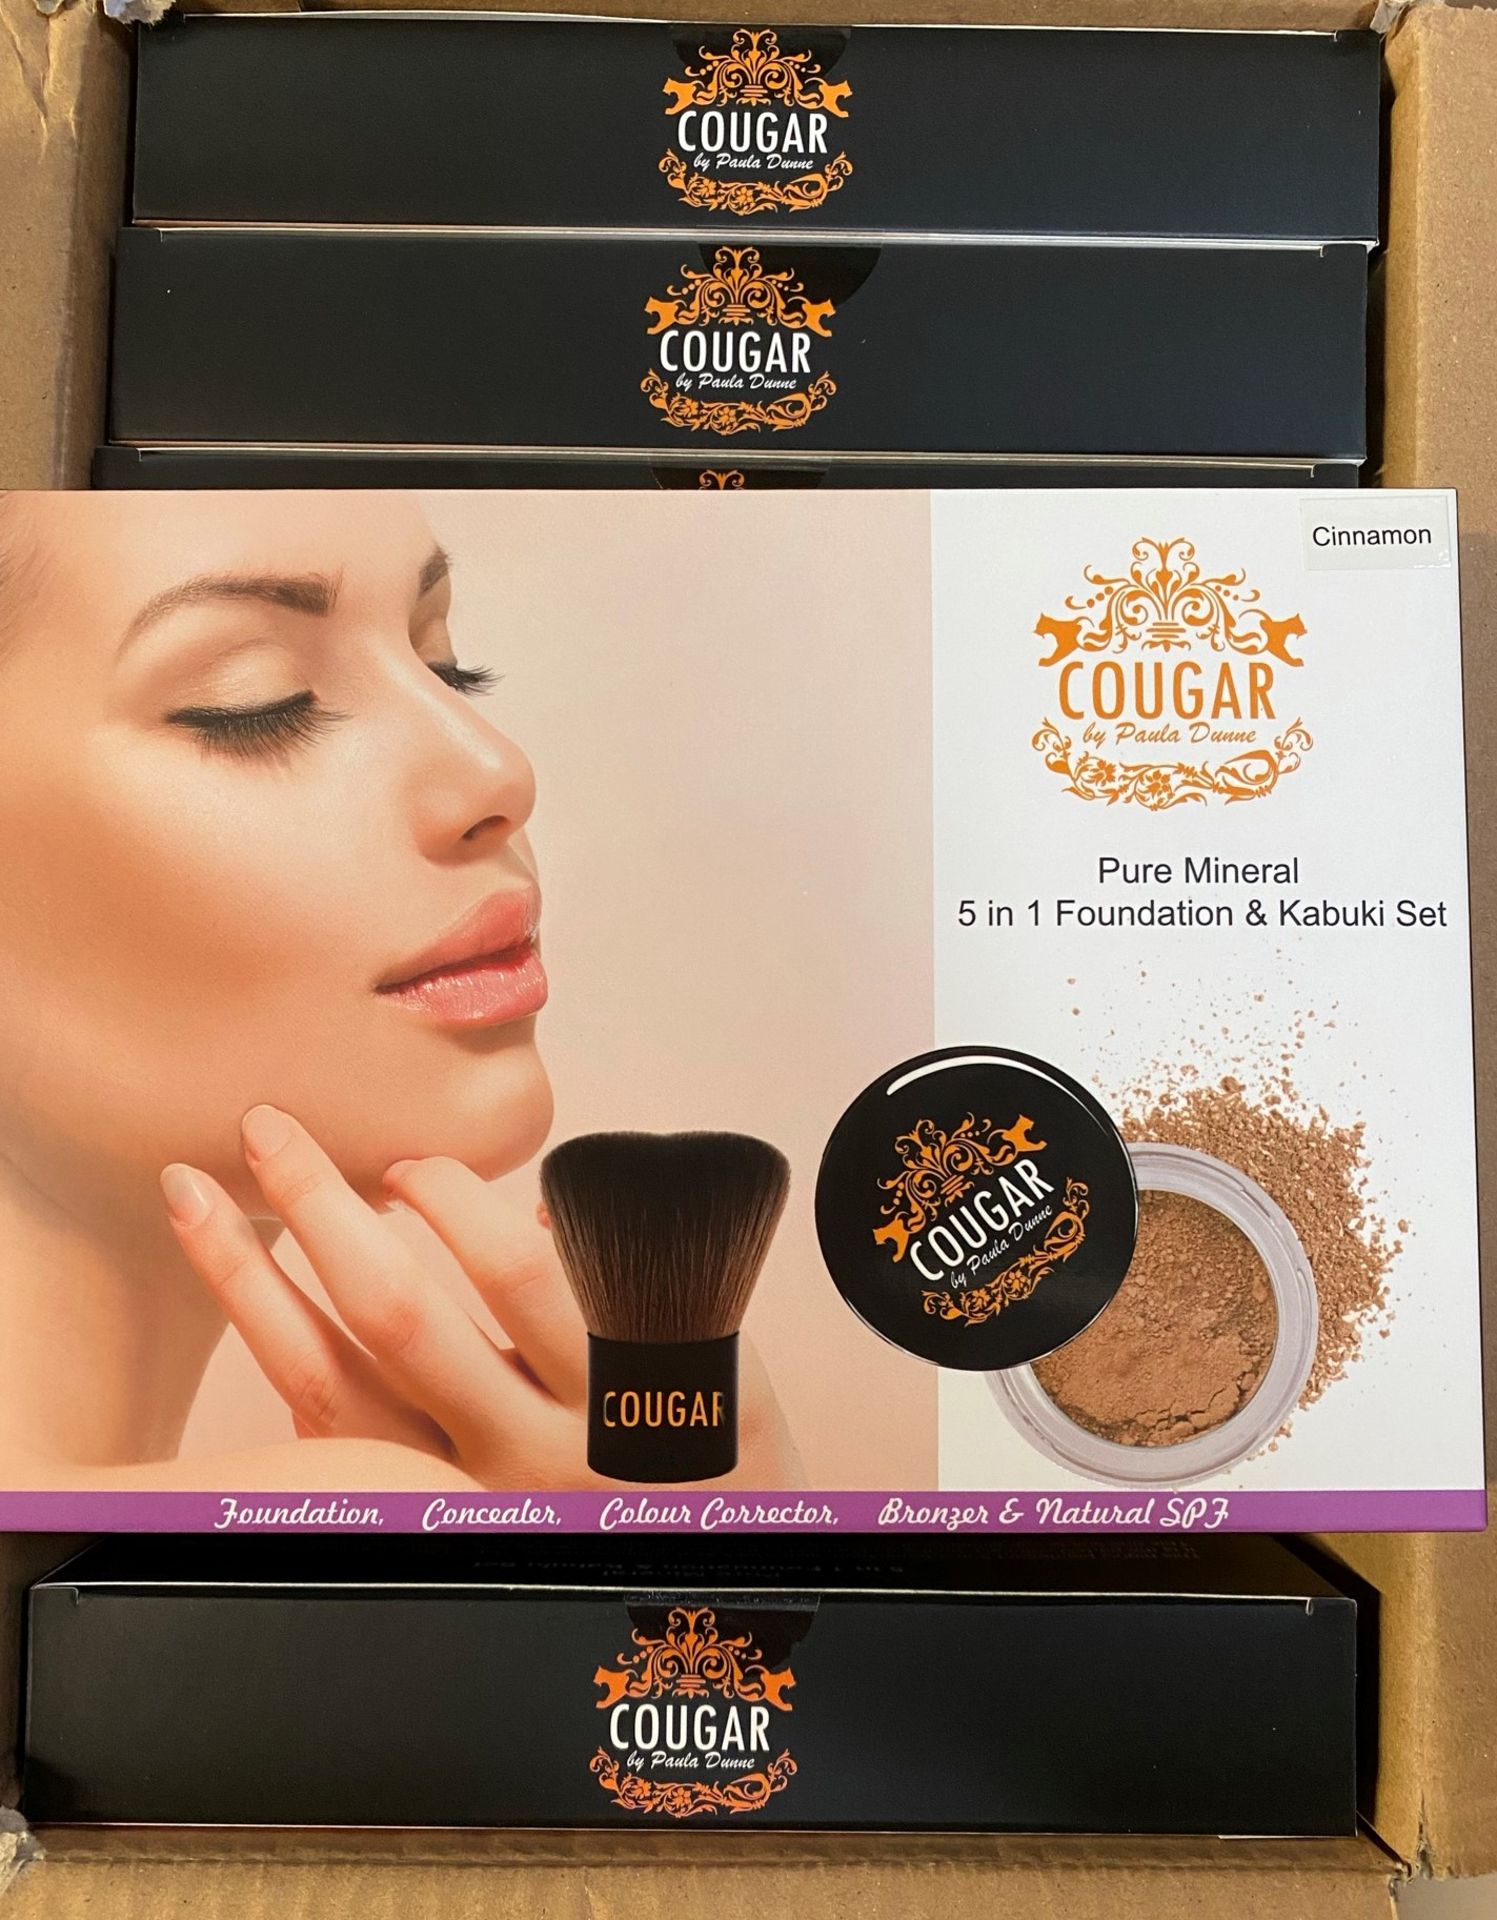 96 x Cougar Pure Mineral 5 in 1 Foundation and Kabuki Cinnamon Sets - 1 outer box (Counts are